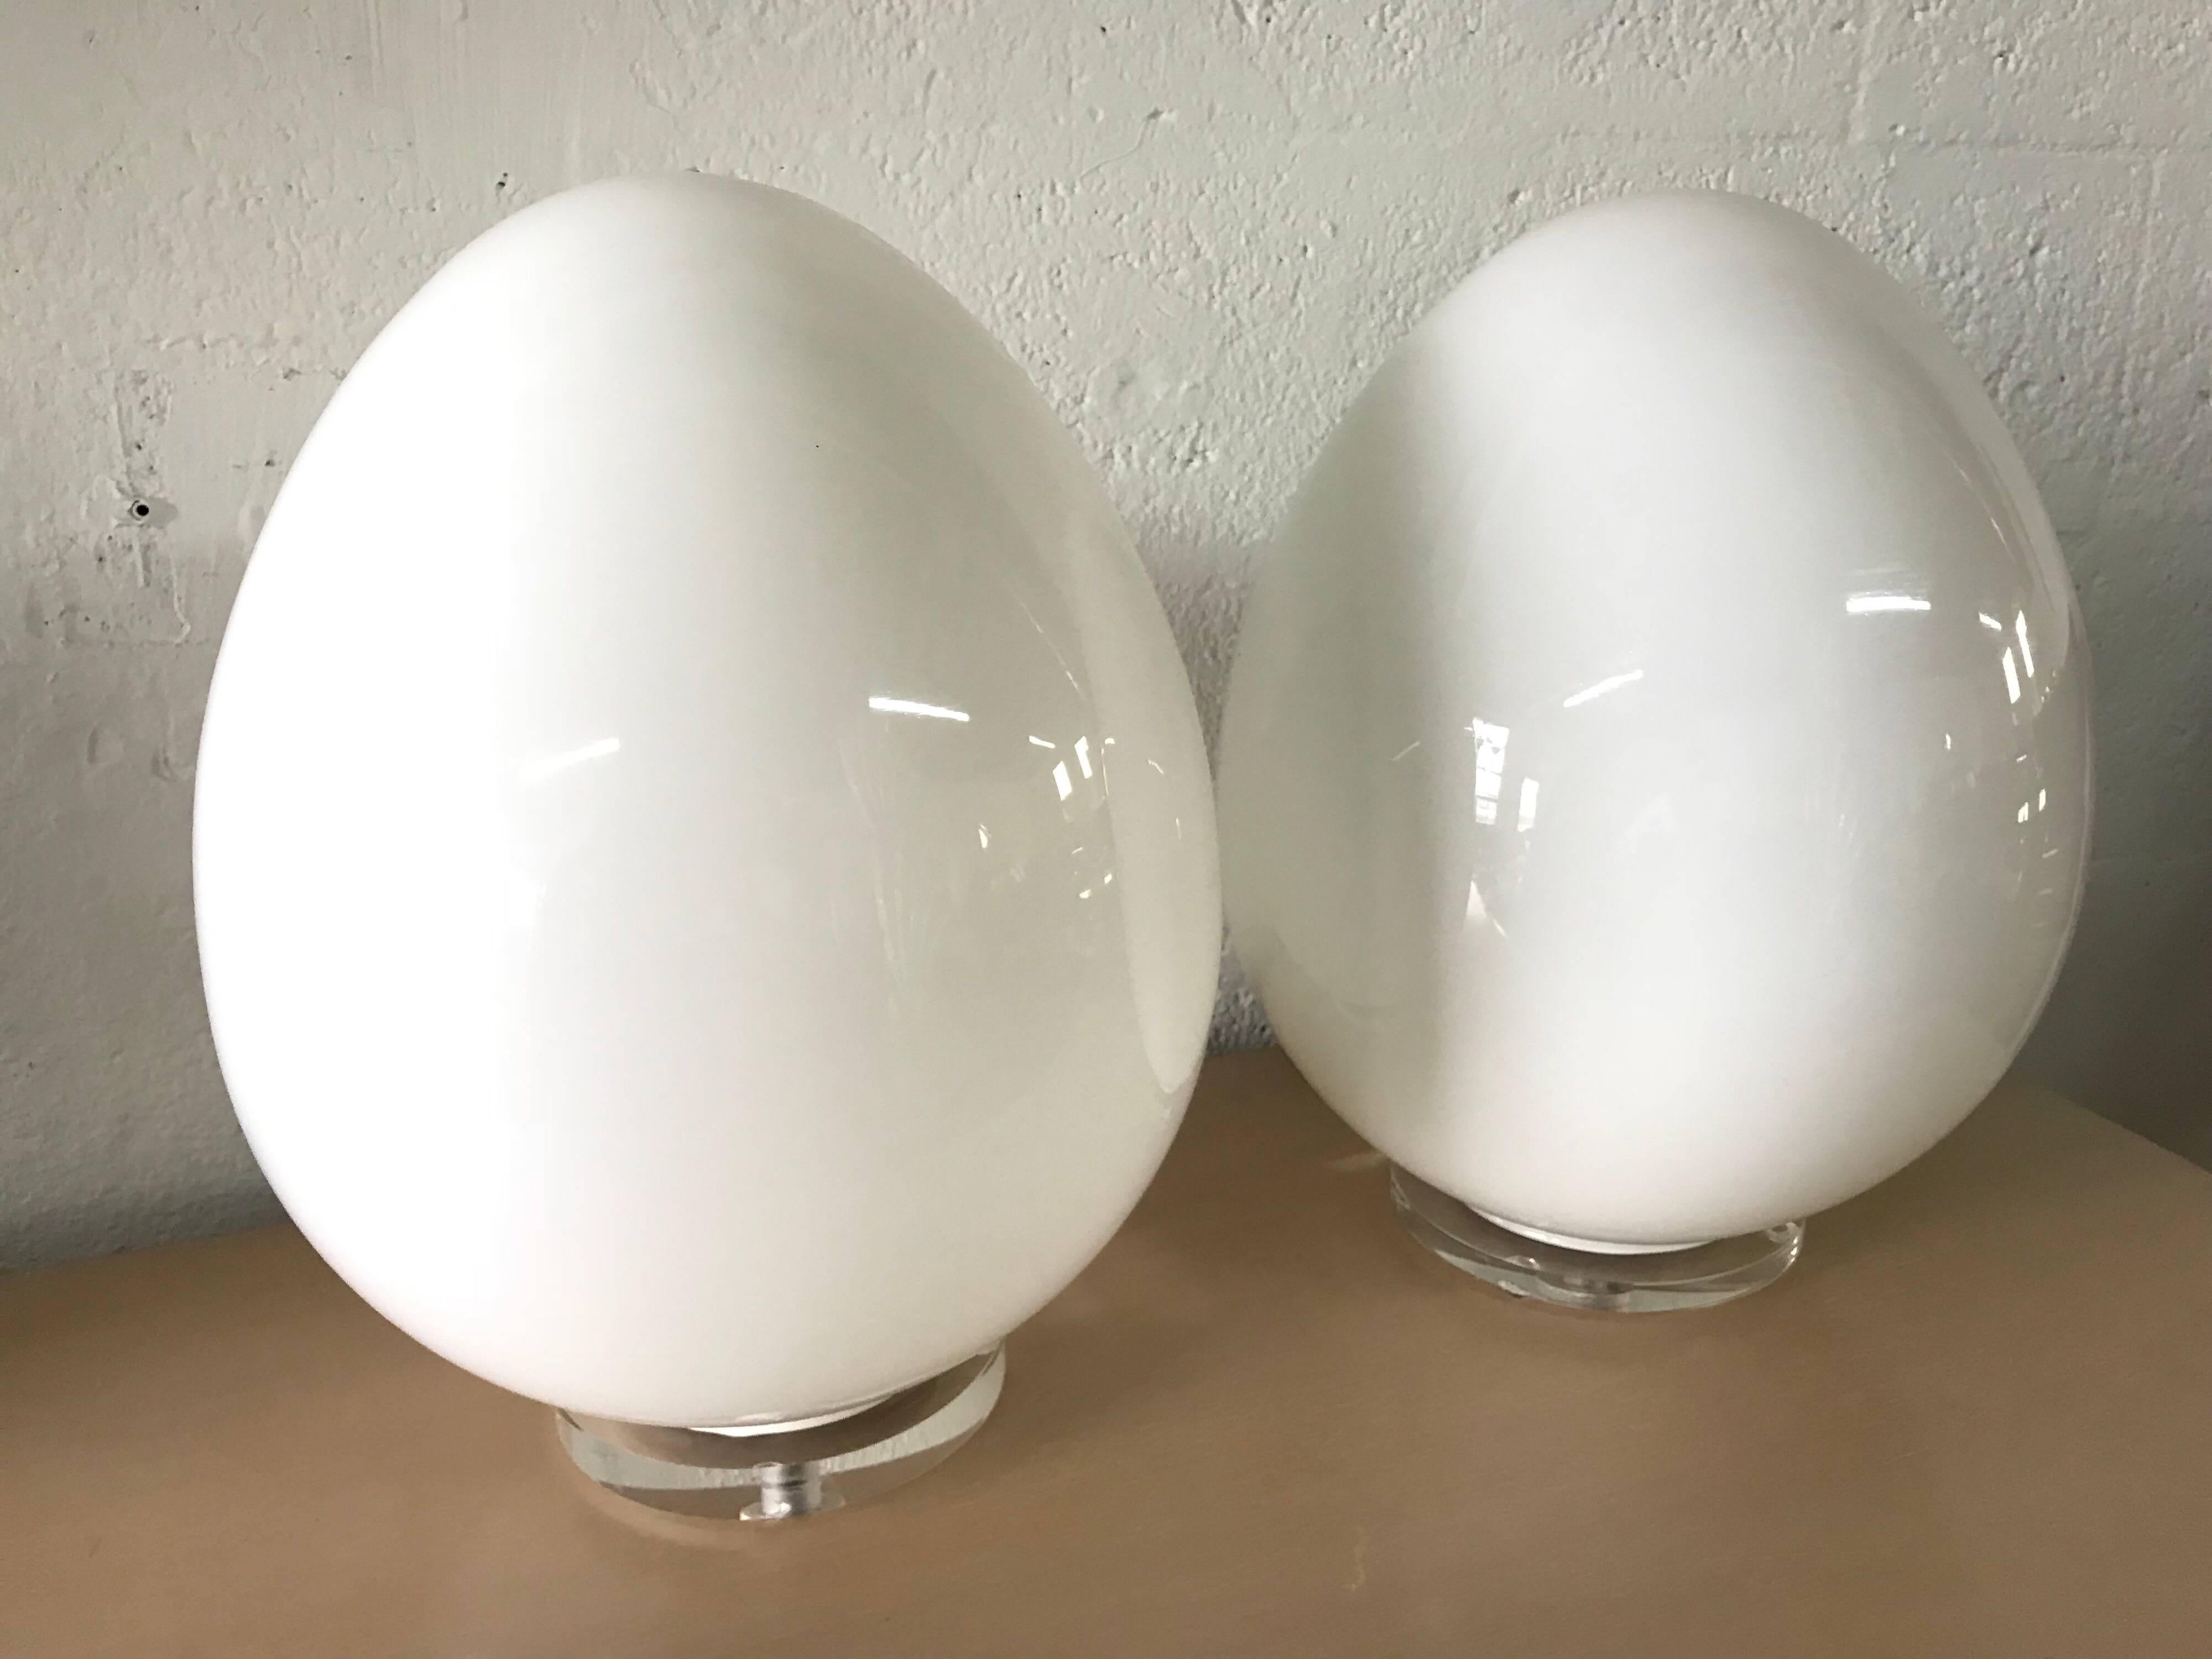 Murano glass egg lamps by Vietri with Lucite bases and two-light settings.